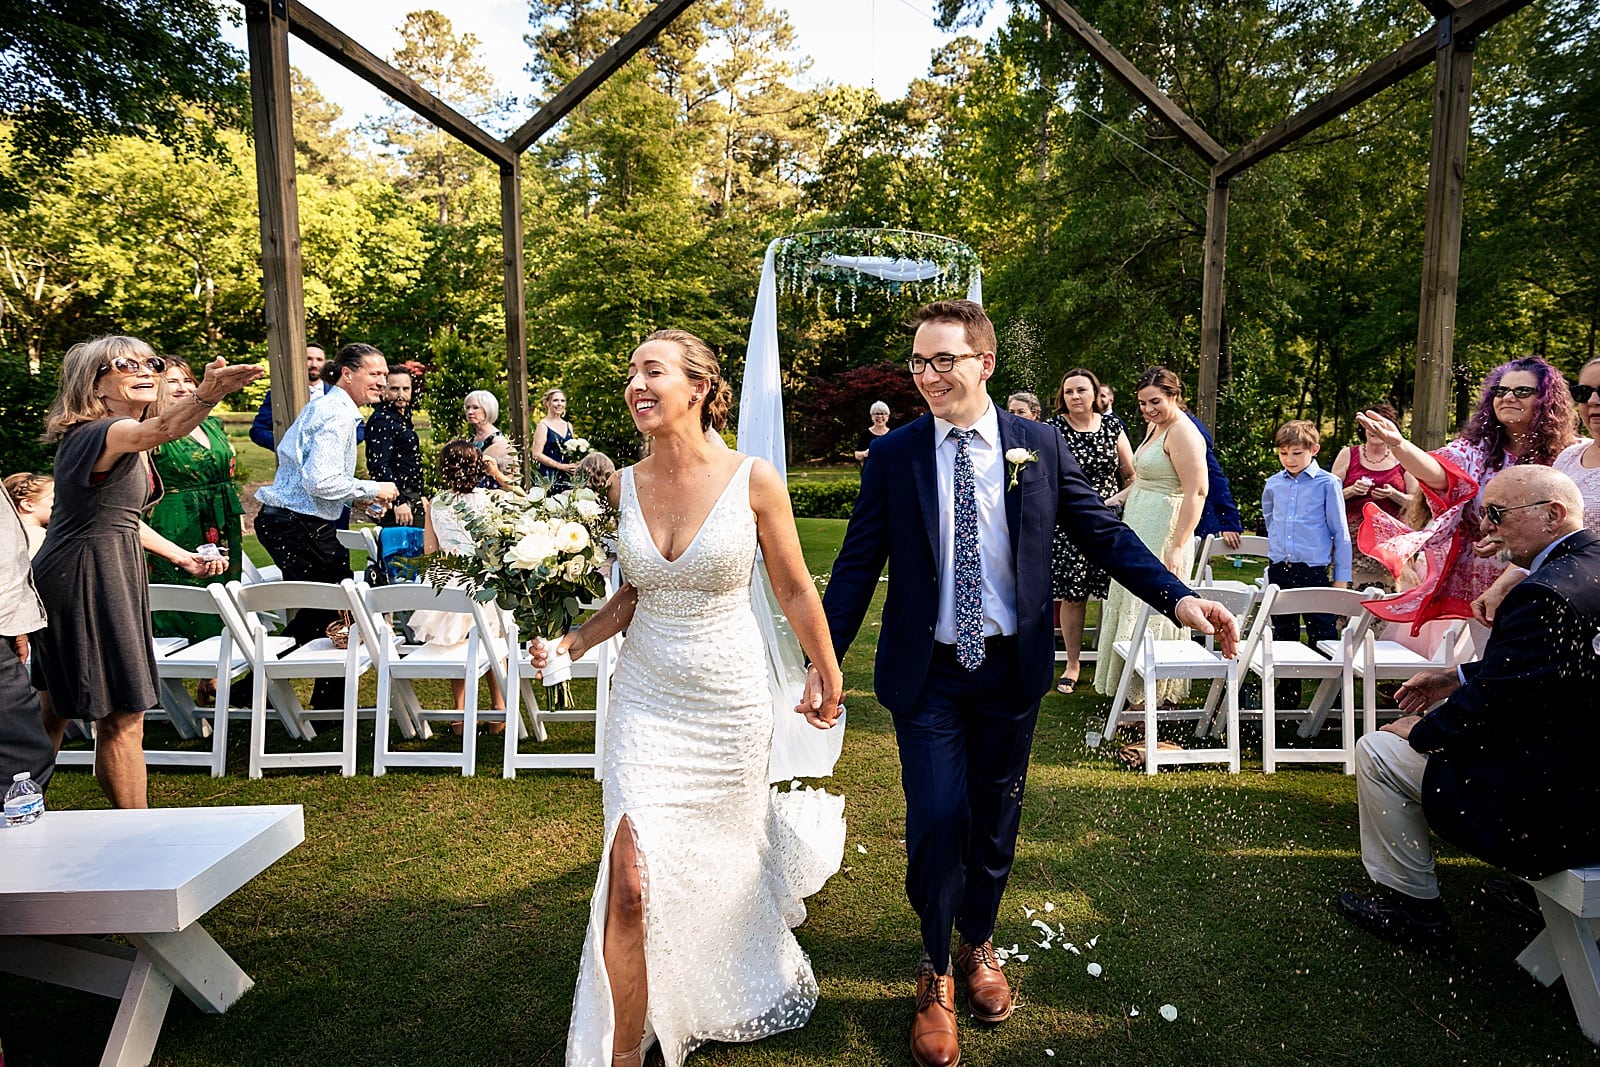 newlyweds recess down the aisle at this Carriage House summer wedding by Chapel Hill wedding Photographers Kivus & Camera